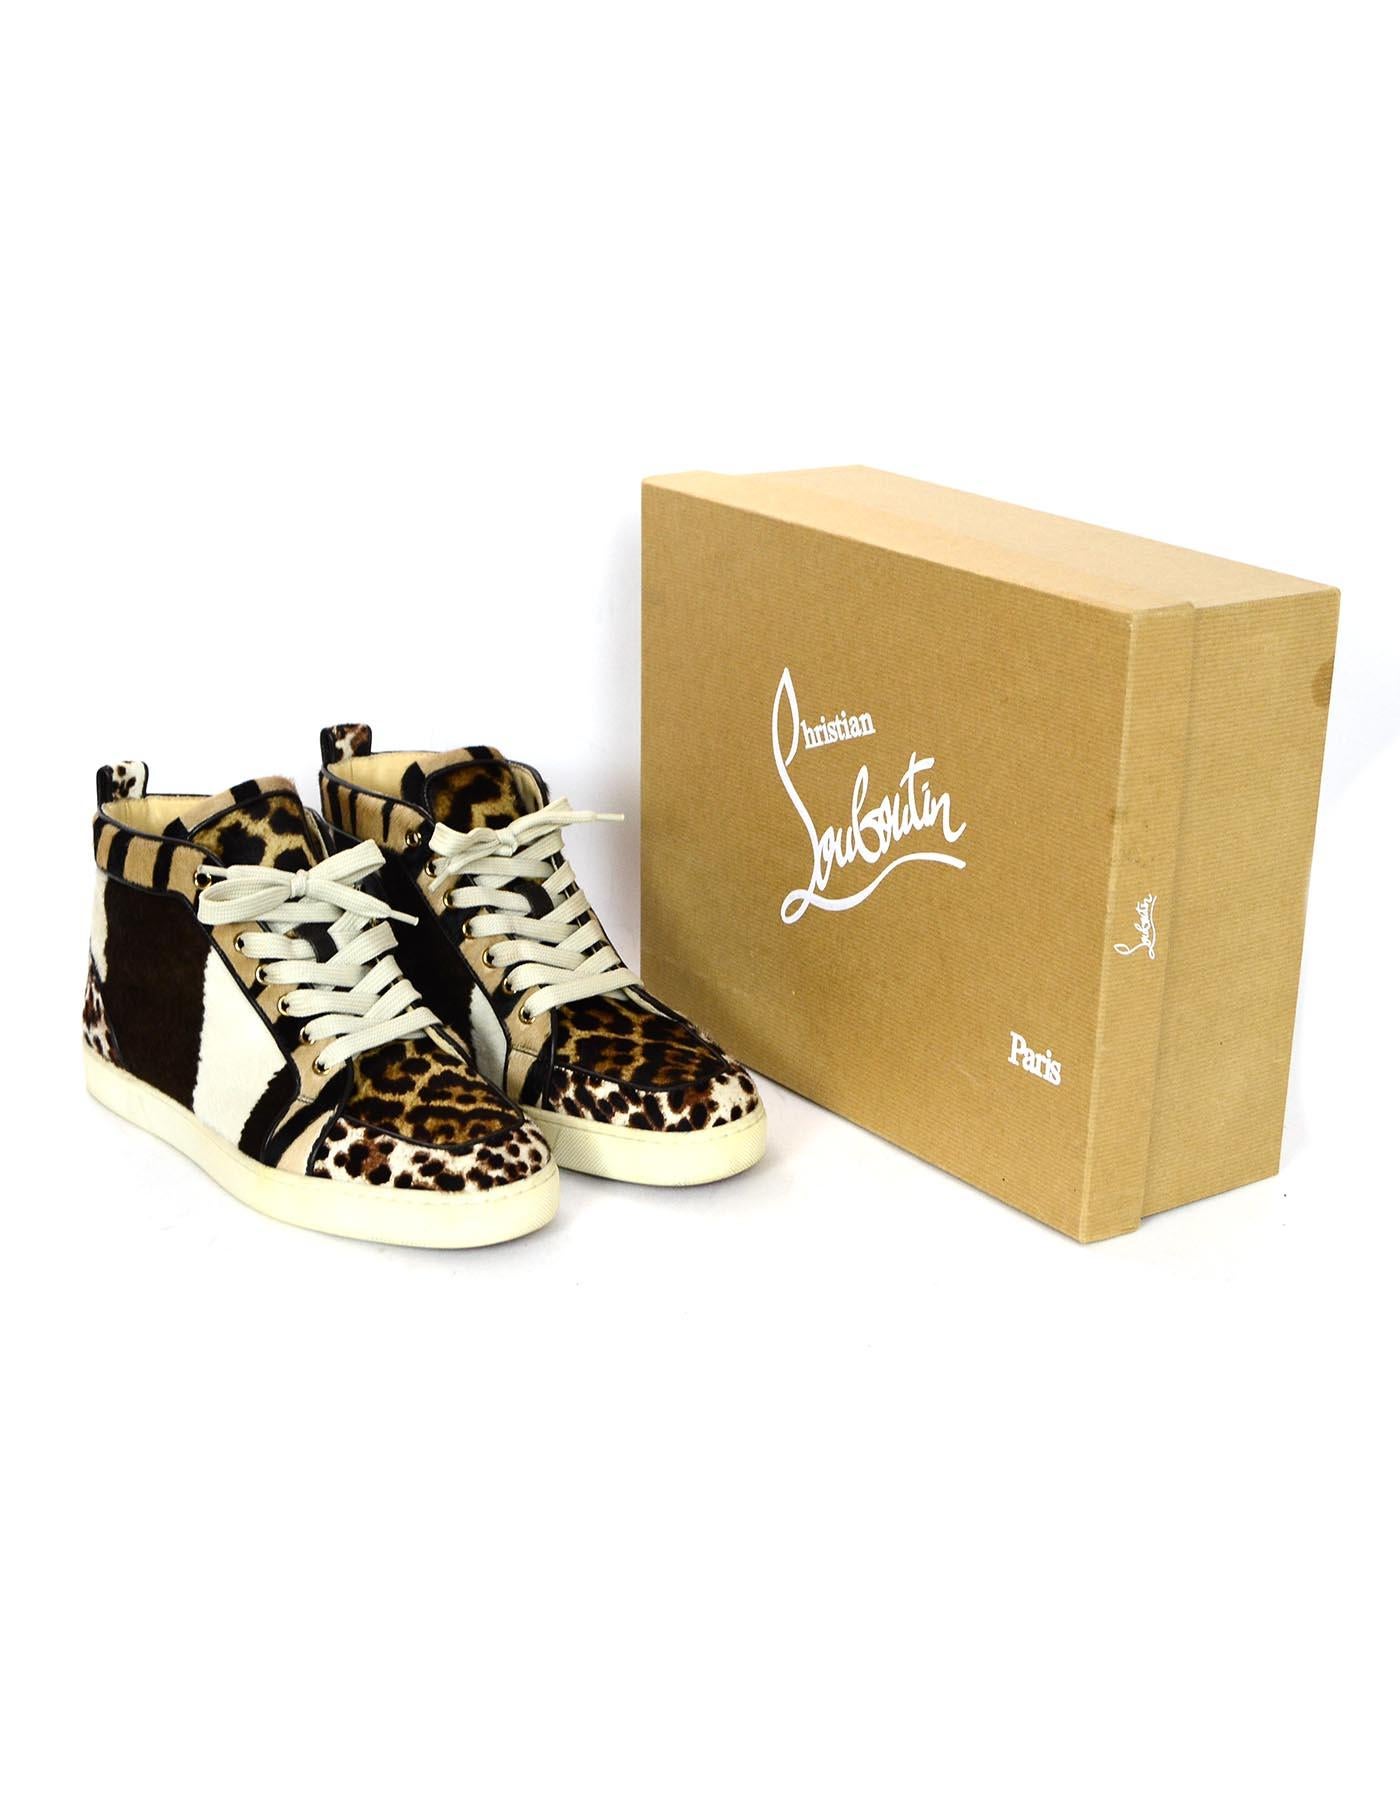 Christian Louboutin Leopard Calfskin High Top Sneakers Sz 40

Made In: Italy
Color: Brown, tan, white
Materials: Calfskin 
Closure/Opening: Lace up front
Overall Condition: Excellent pre-owned condition 
Includes: Christian Louboutin